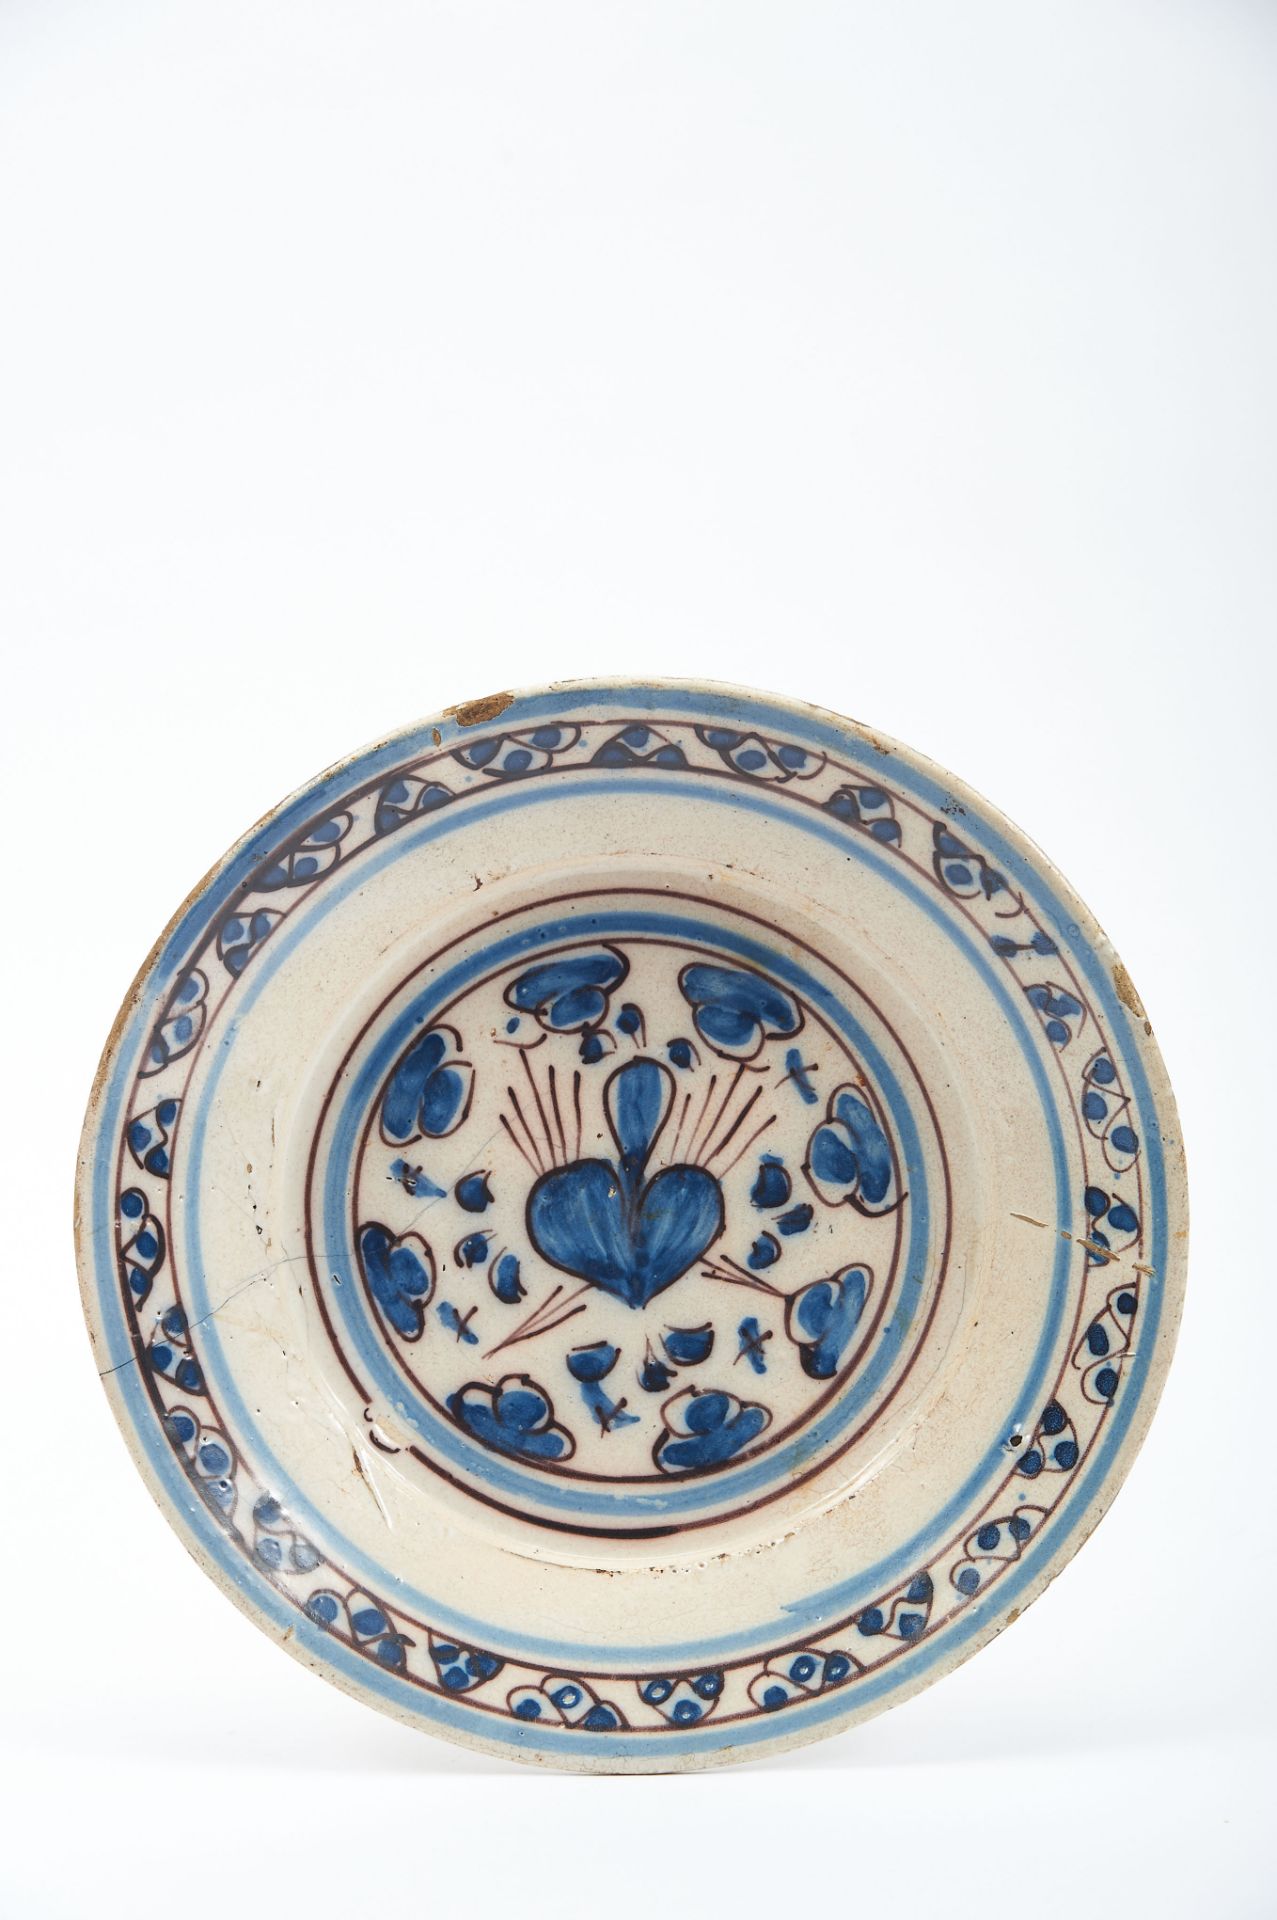 A Dish, faience, blue and vinous decoration known as "Contas", "Pierced Heart", Portuguese, 17th